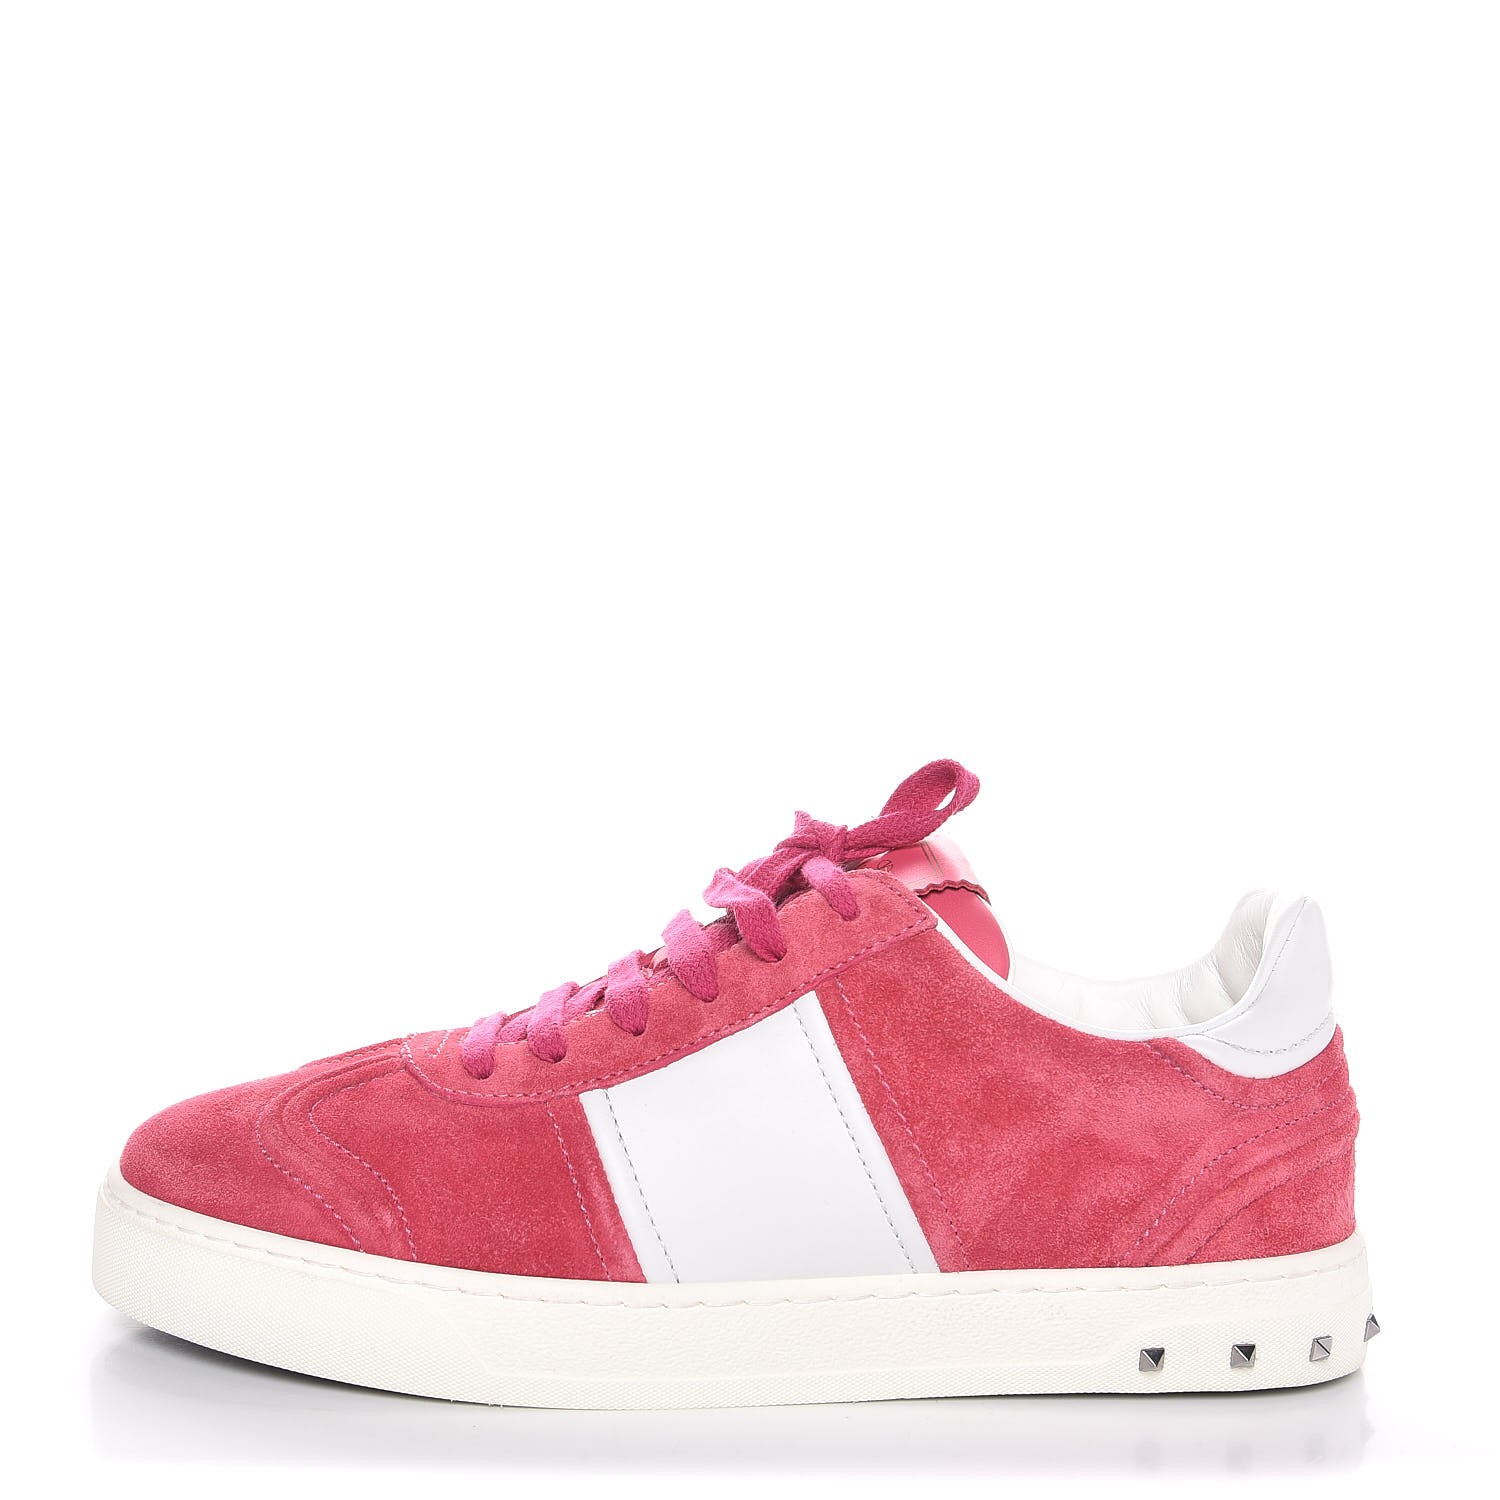 VALENTINO Suede Flycrew Sneakers 39 Pink 300342 | FASHIONPHILE